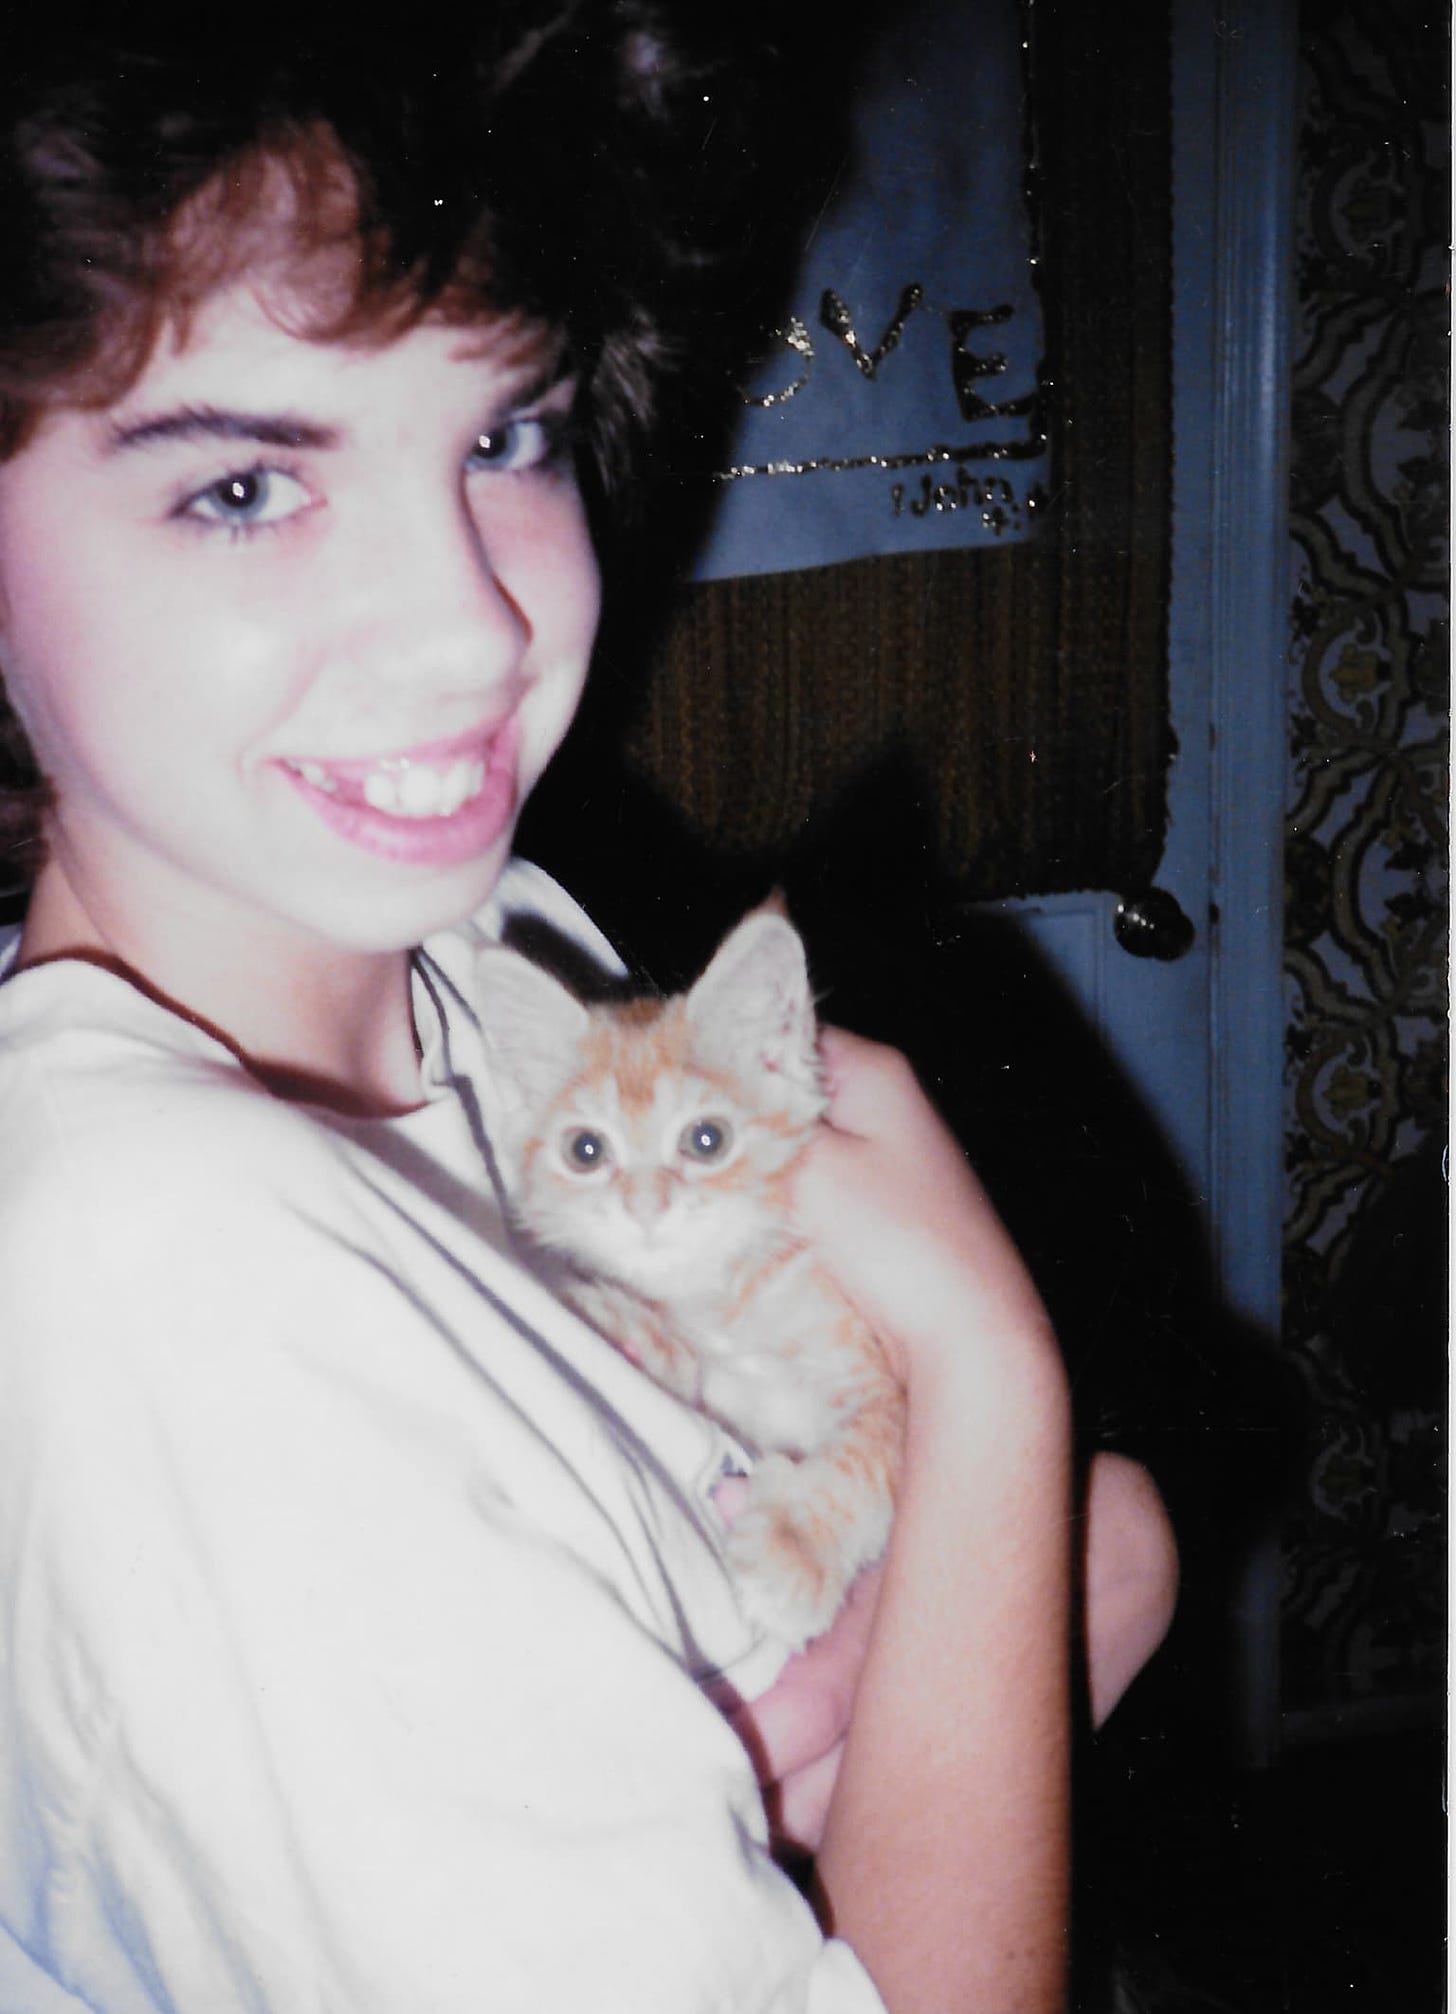 A little girl with short brown hair sometime in the 1980's holding a tiny calico kitten, the runt of the litter.